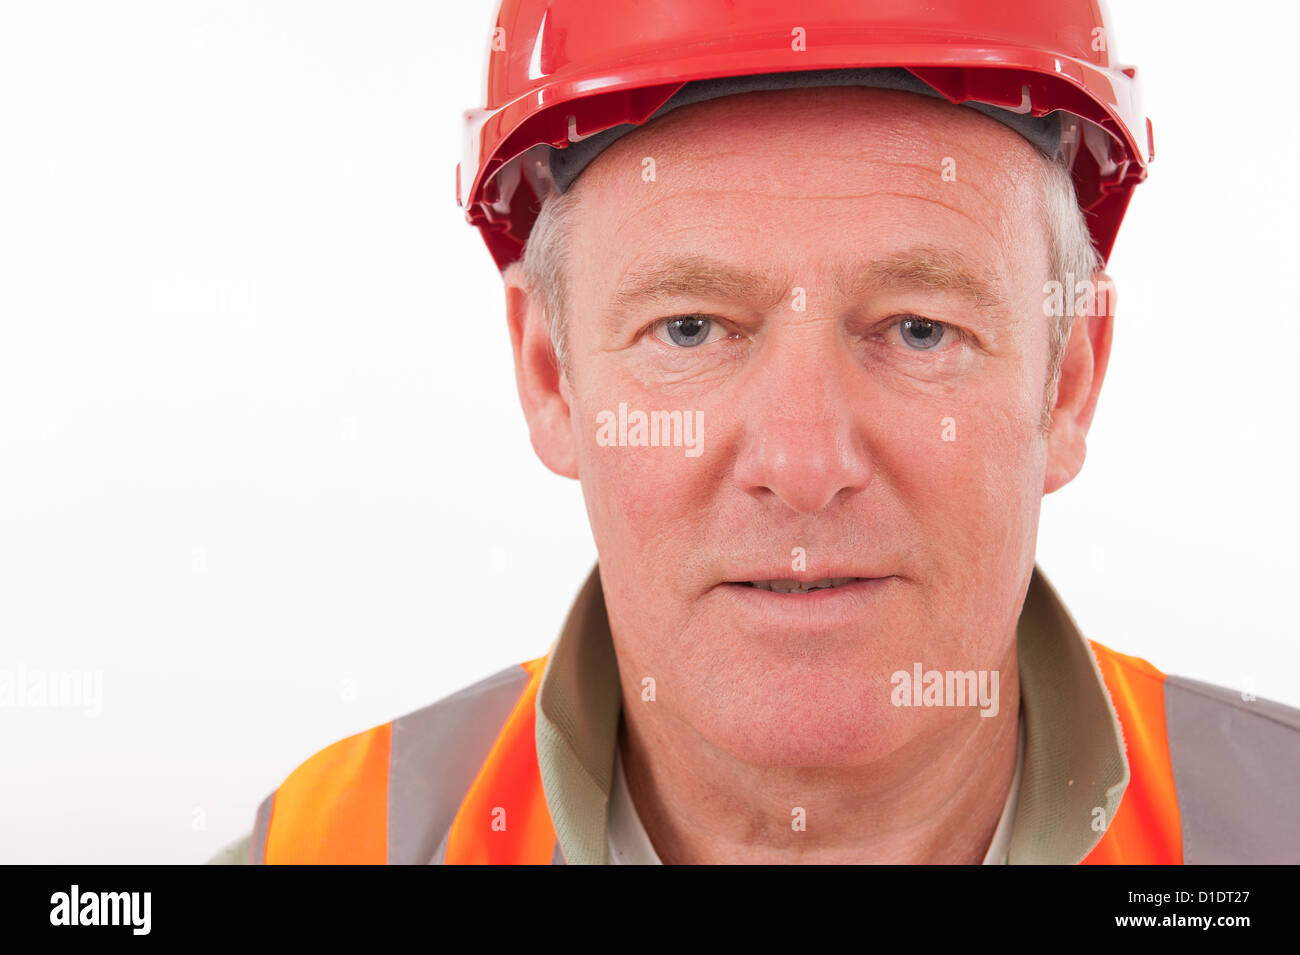 Close up portrait of a construction worker wearing a red hard hat and bright hi-viz jacket. Stock Photo